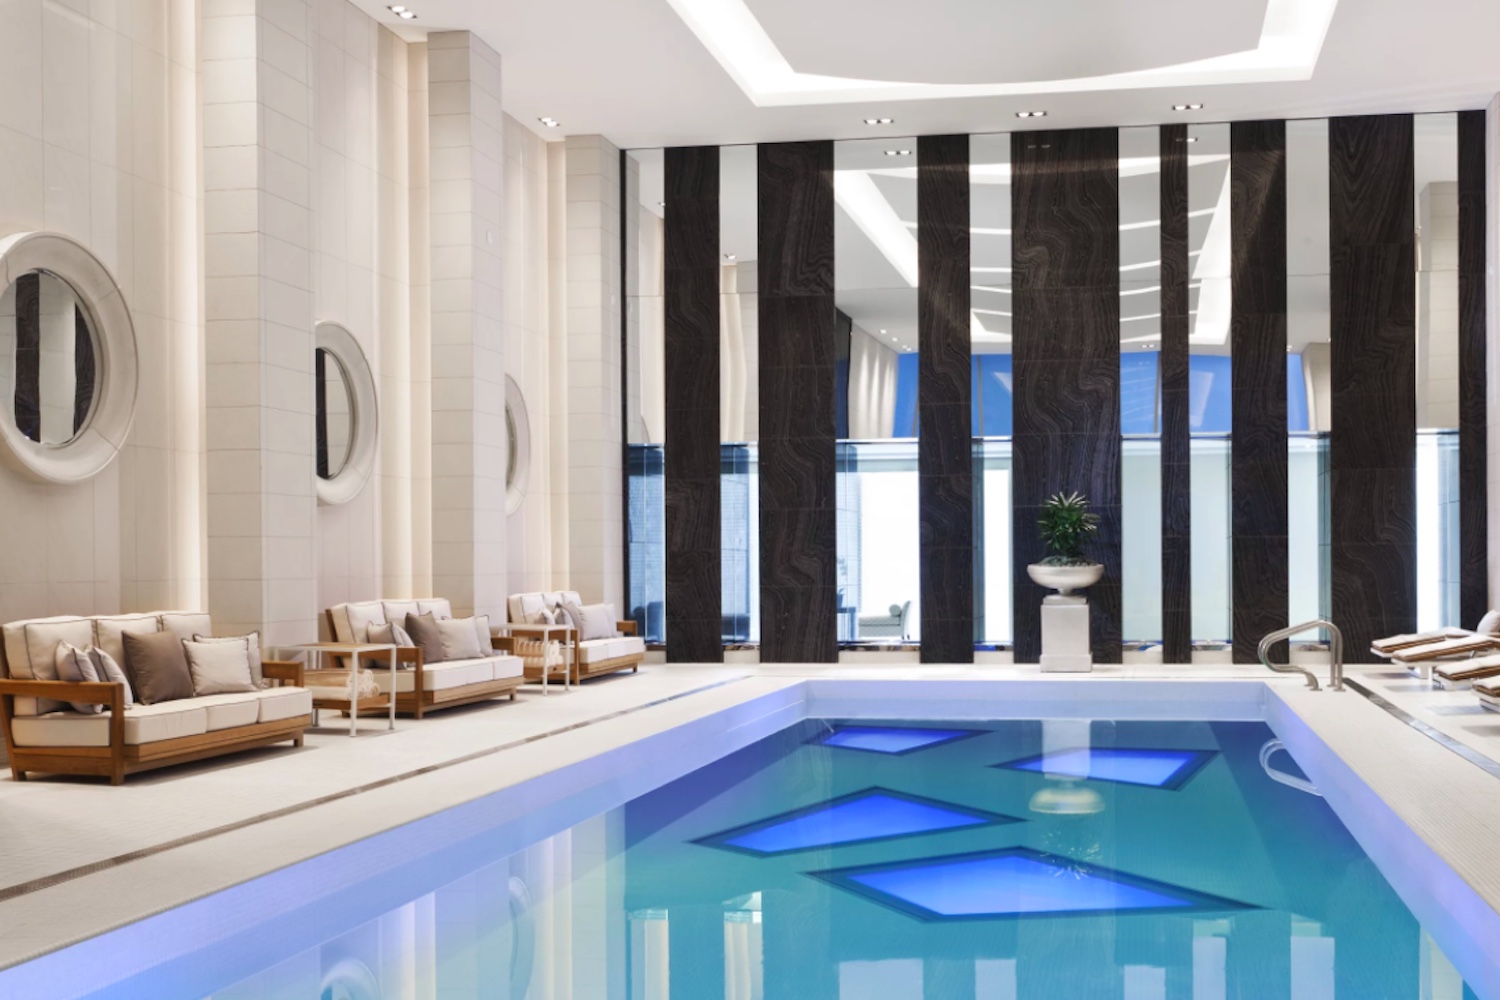 10 of the best spas to relax in around Vancouver.